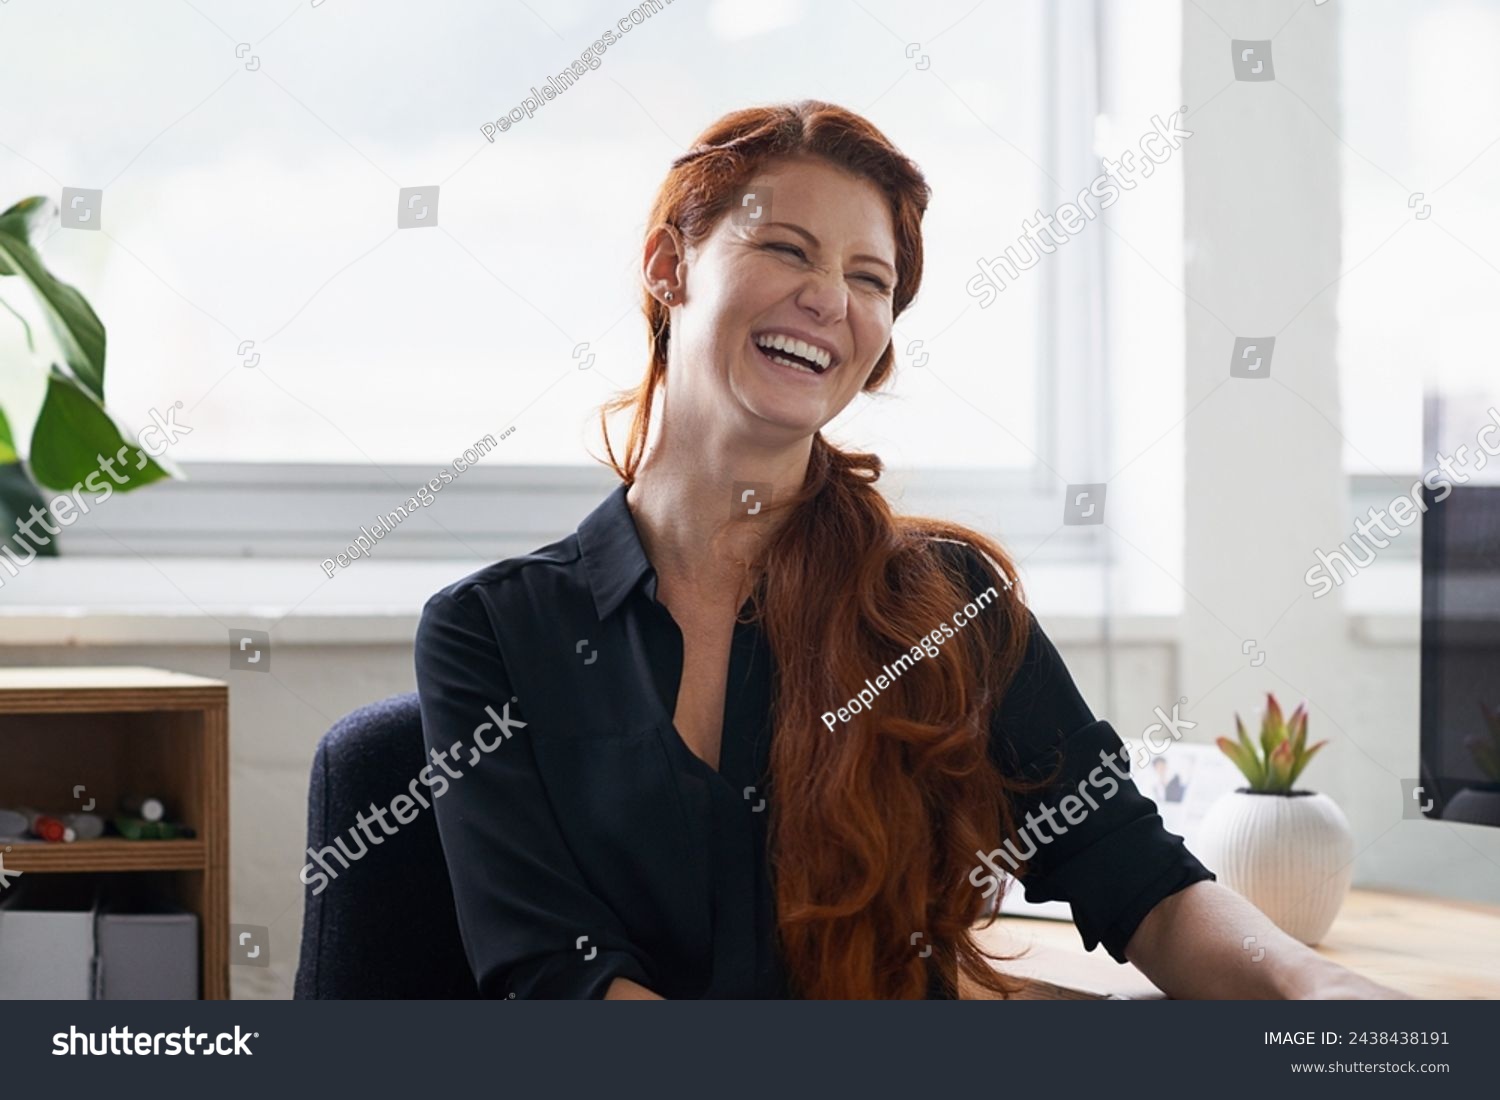 Businesswoman, laughing and office desk as entrepreneur at tech startup for small business, professional or funny. Female person, smile and confidence for company growth or humor, joke or workplace #2438438191